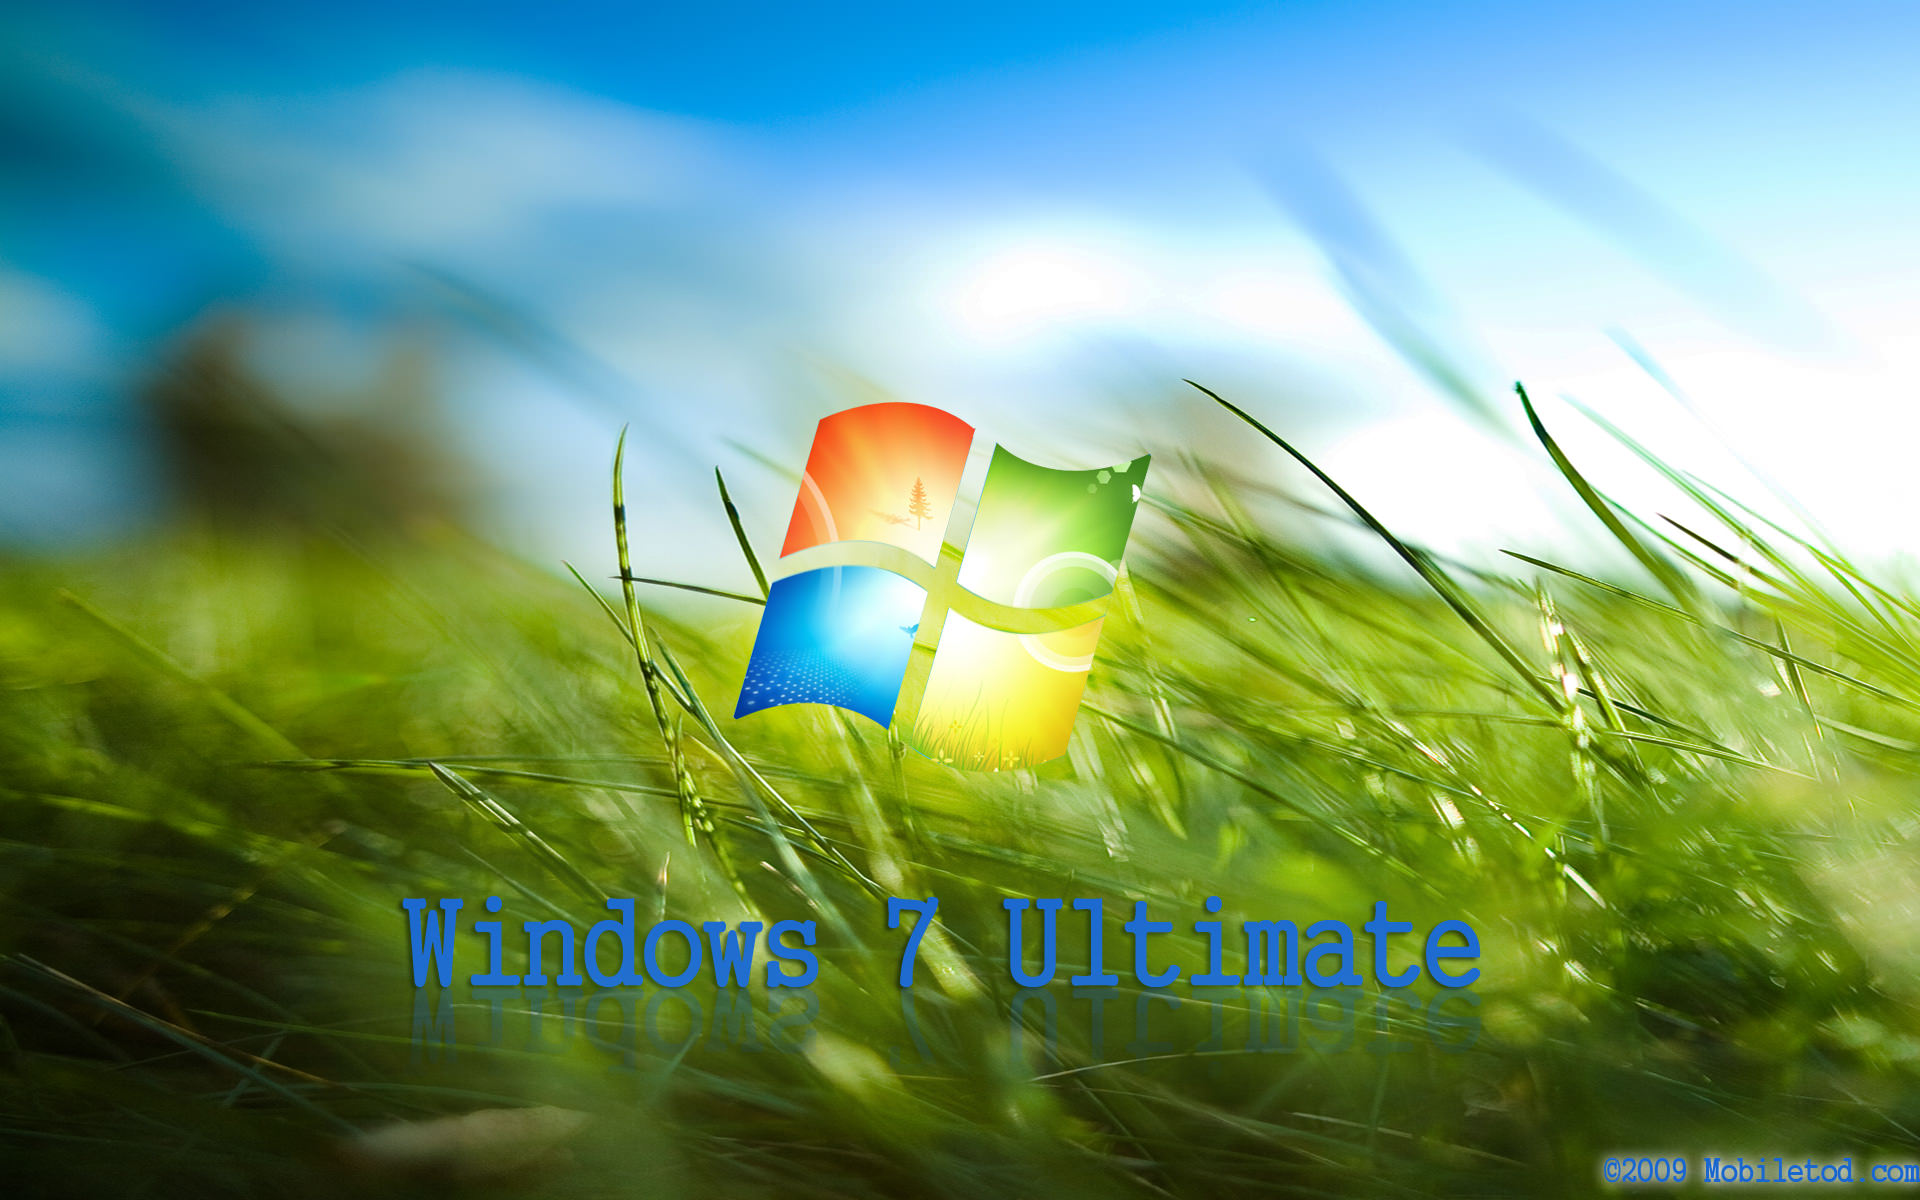 HD Wallpapers for Windows 7 Ultimate - HD Wallpapers Inx